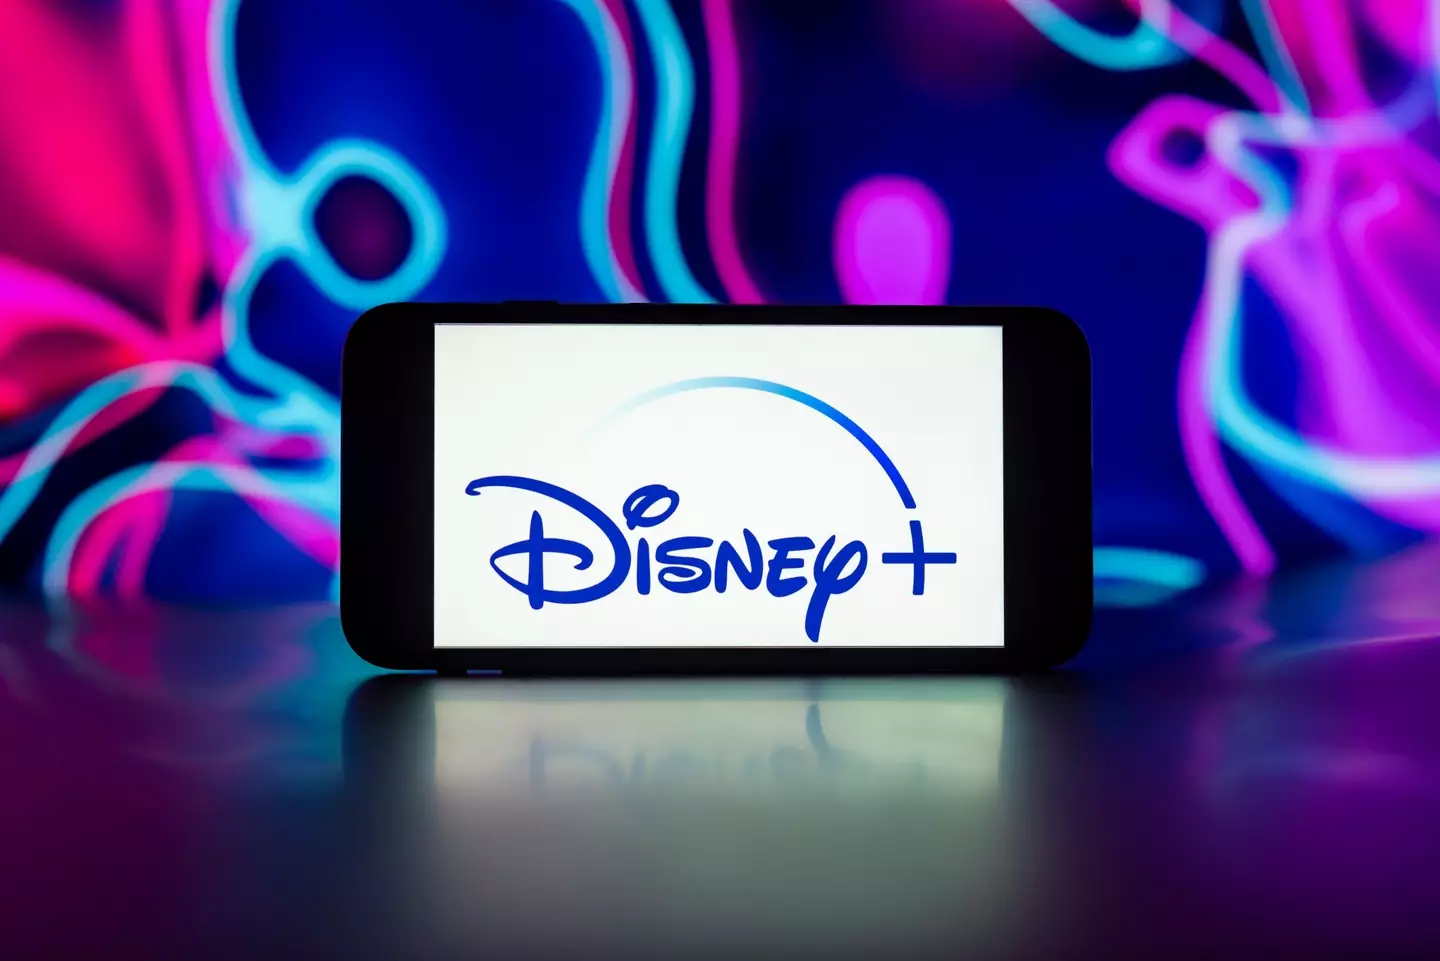 They accidentally bought vouchers for Disney+. (Idrees Abbas/SOPA Images/LightRocket via Getty Images)